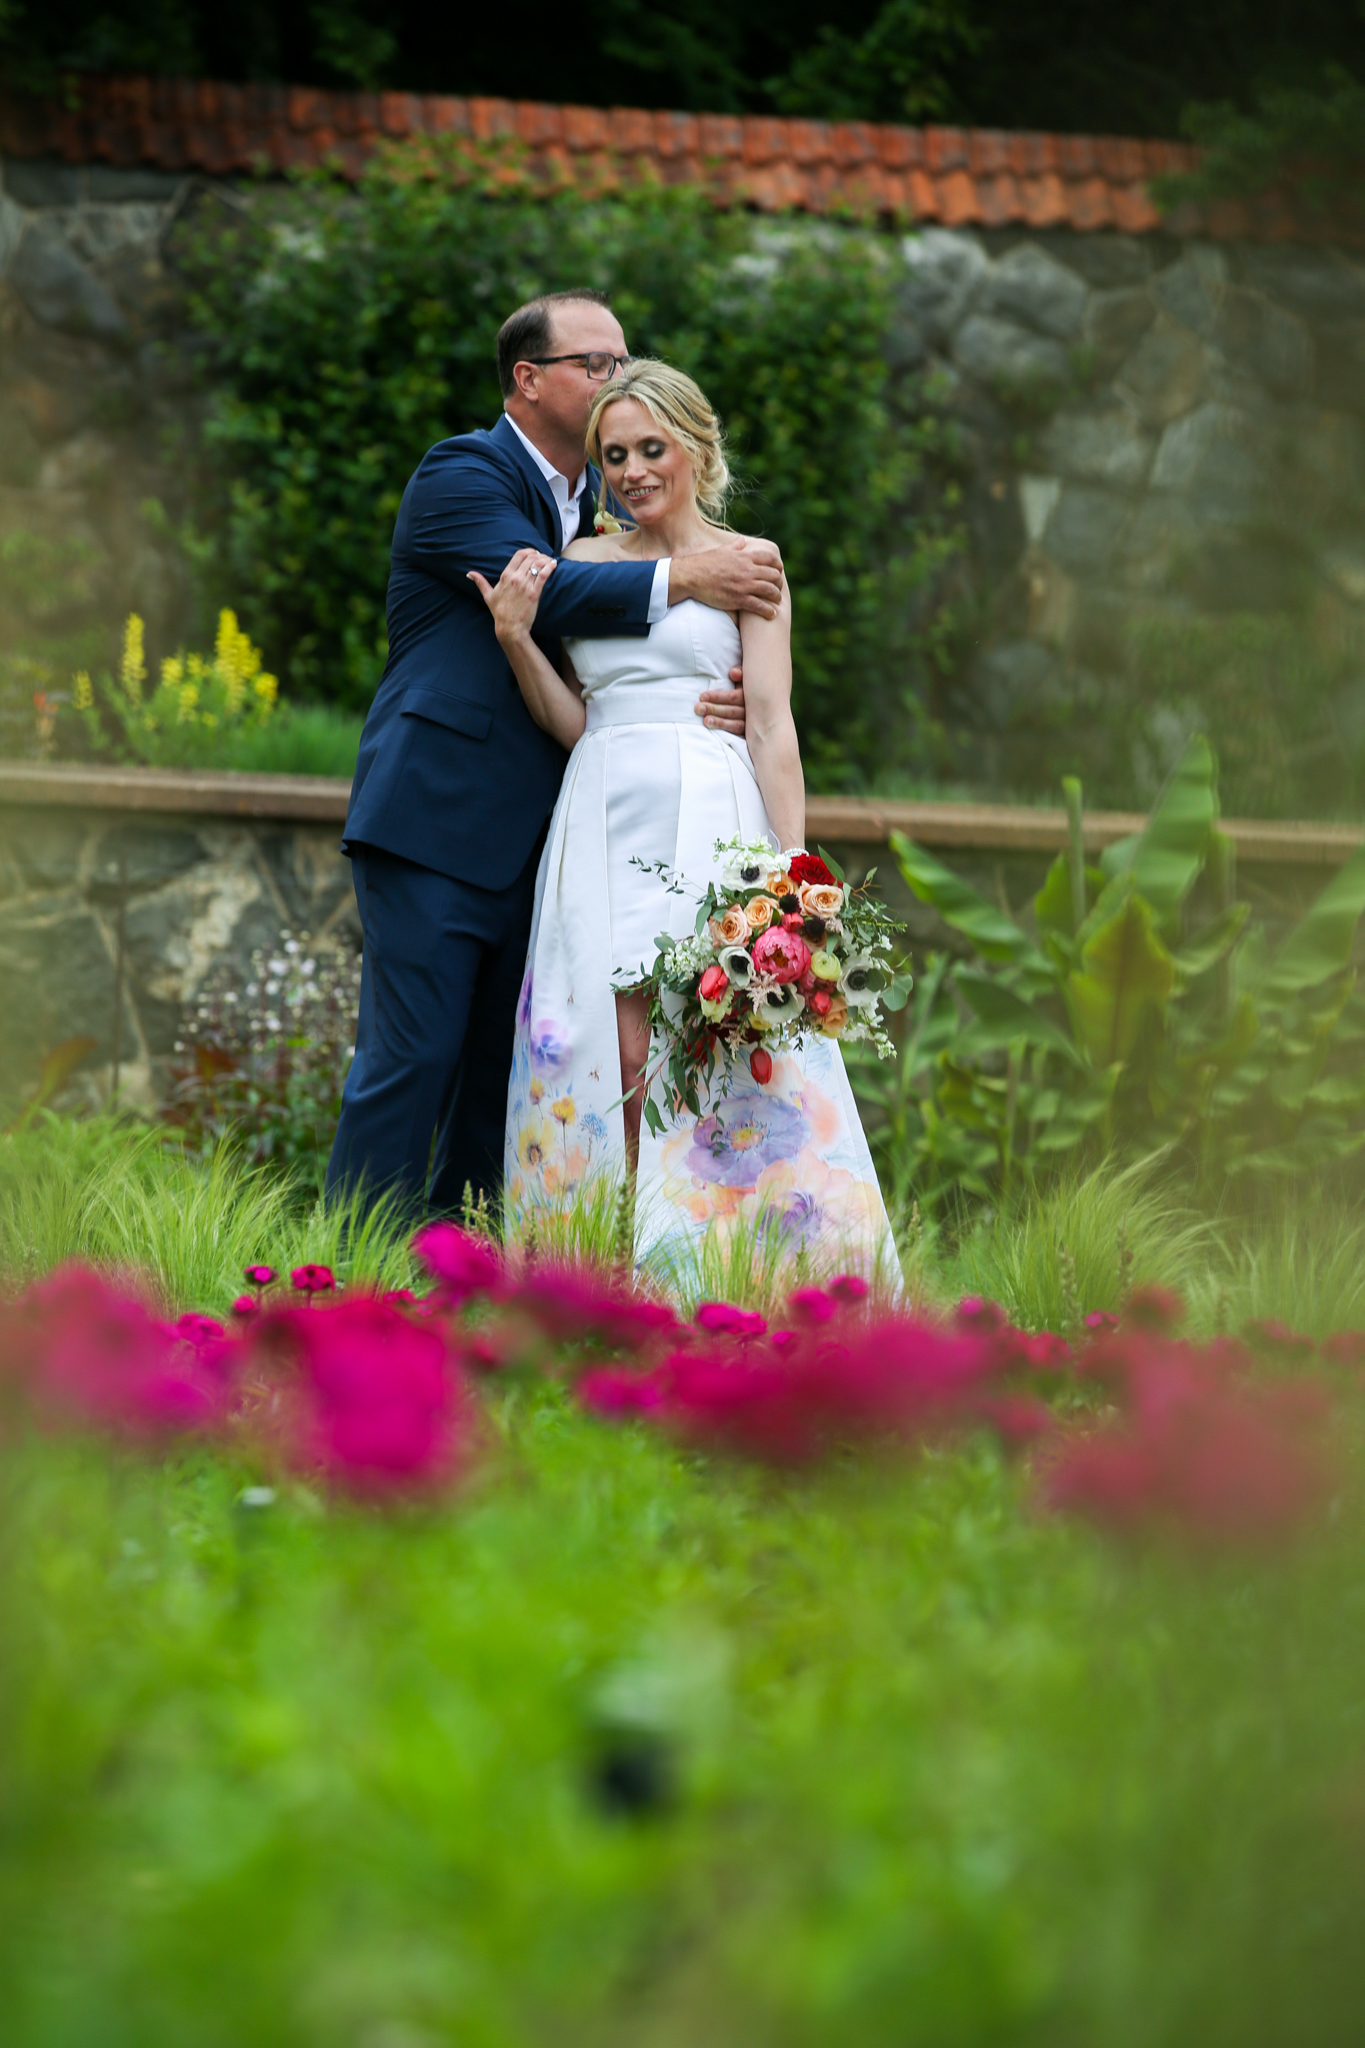 Asheville NC is a great spot for a North Carolina Wedding.